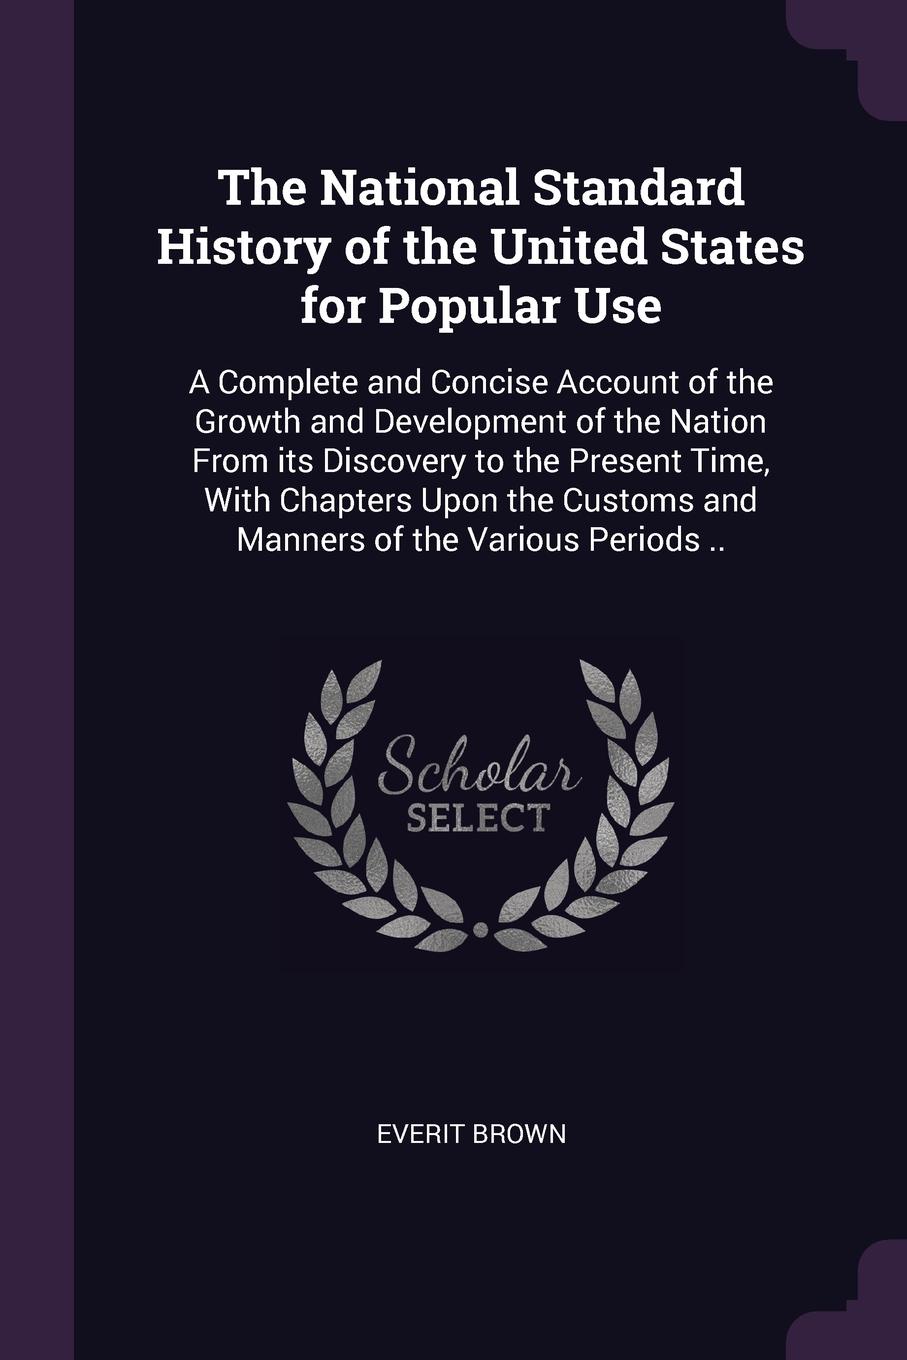 The National Standard History of the United States for Popular Use. A Complete and Concise Account of the Growth and Development of the Nation From its Discovery to the Present Time, With Chapters Upon the Customs and Manners of the Various Period...